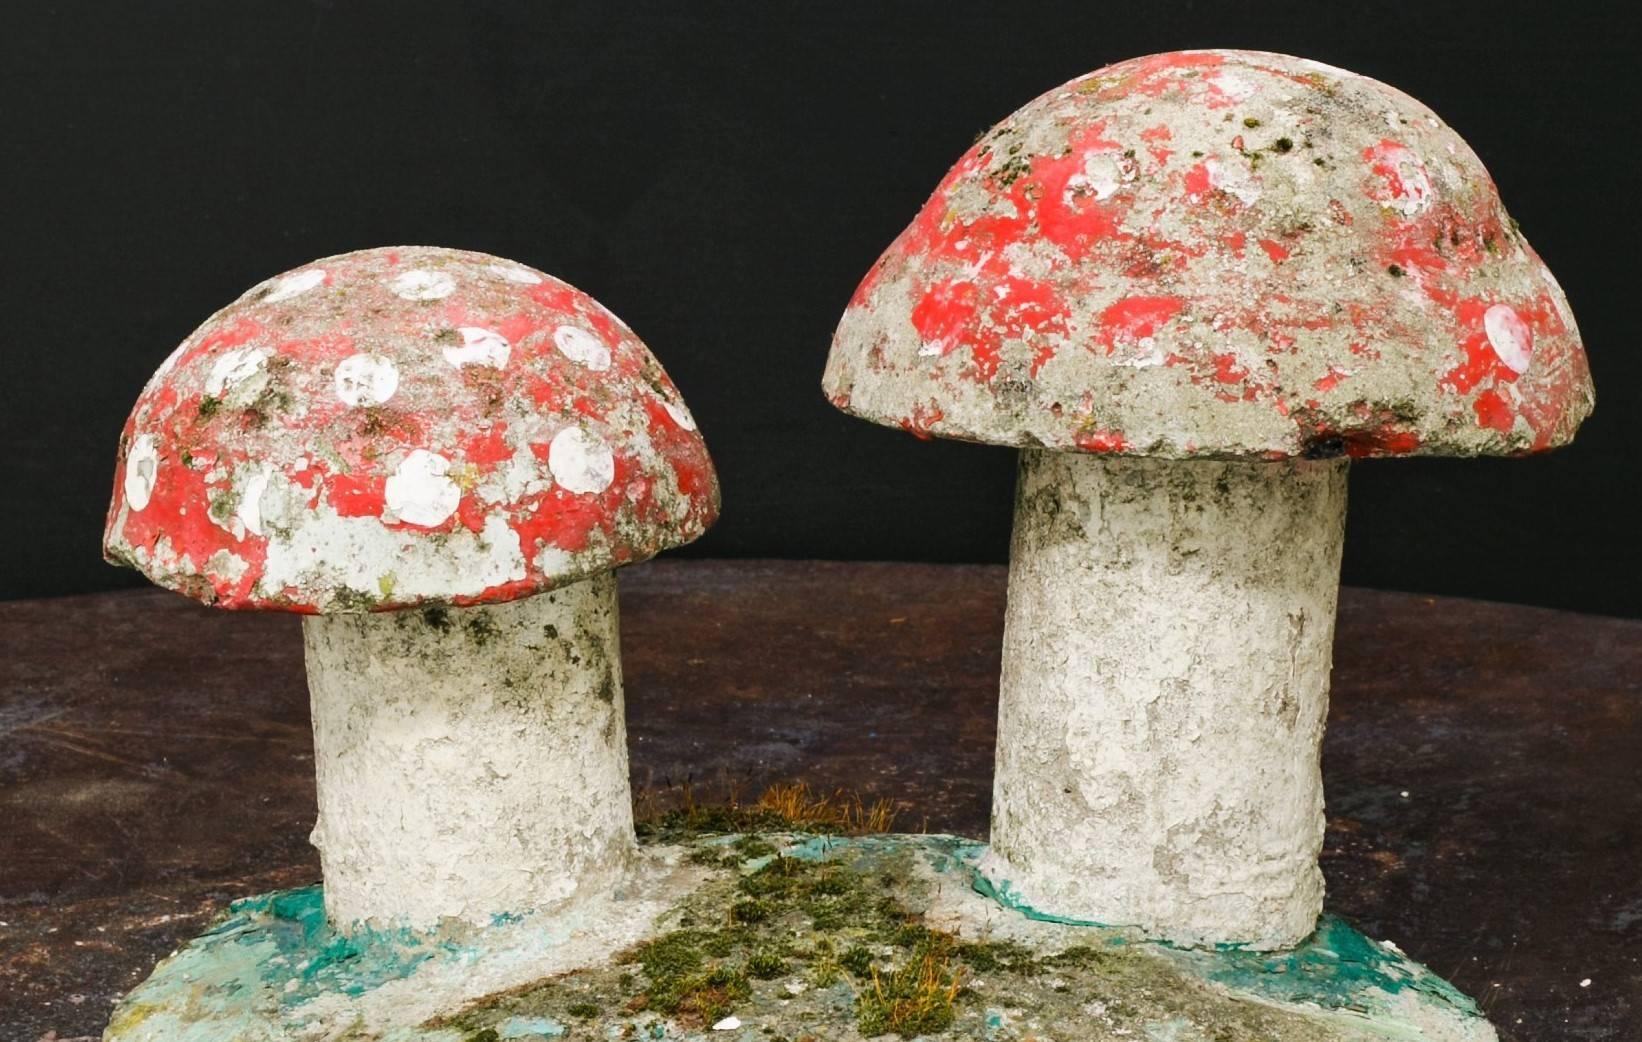 Charming, small hand-painted concrete toadstool garden sculpture.